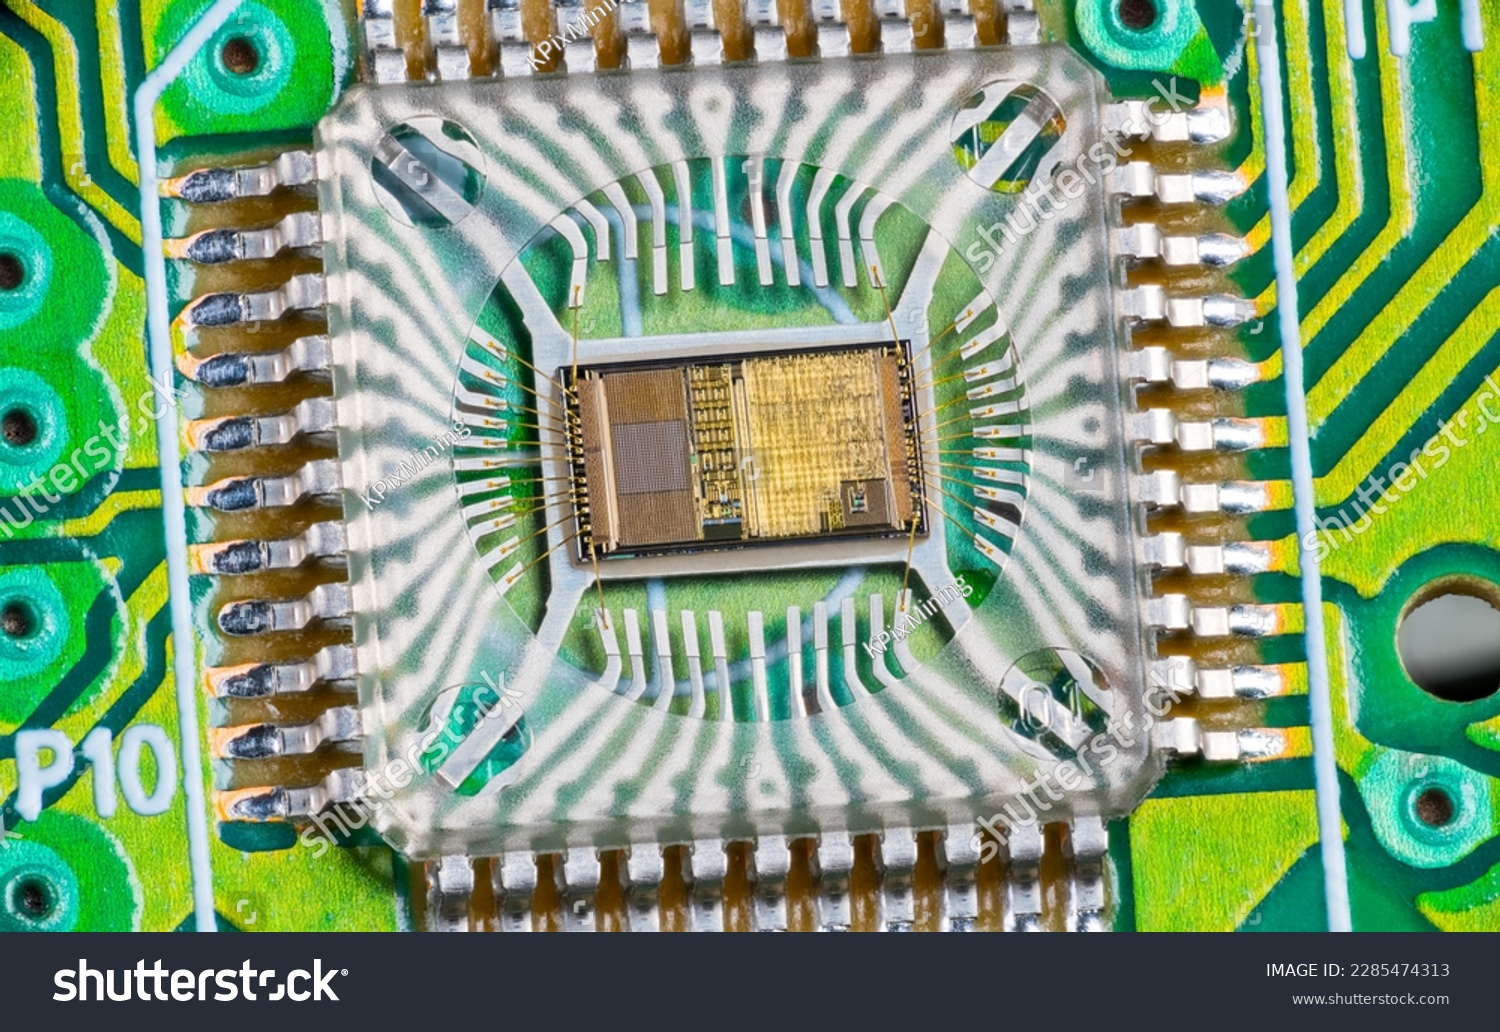 Closeup of electronic integrated circuit die with photodiode array and gold wires on green PCB. Micro chip inside optical computer mouse image sensor in plastic package with round hole and metal pins. #2285474313